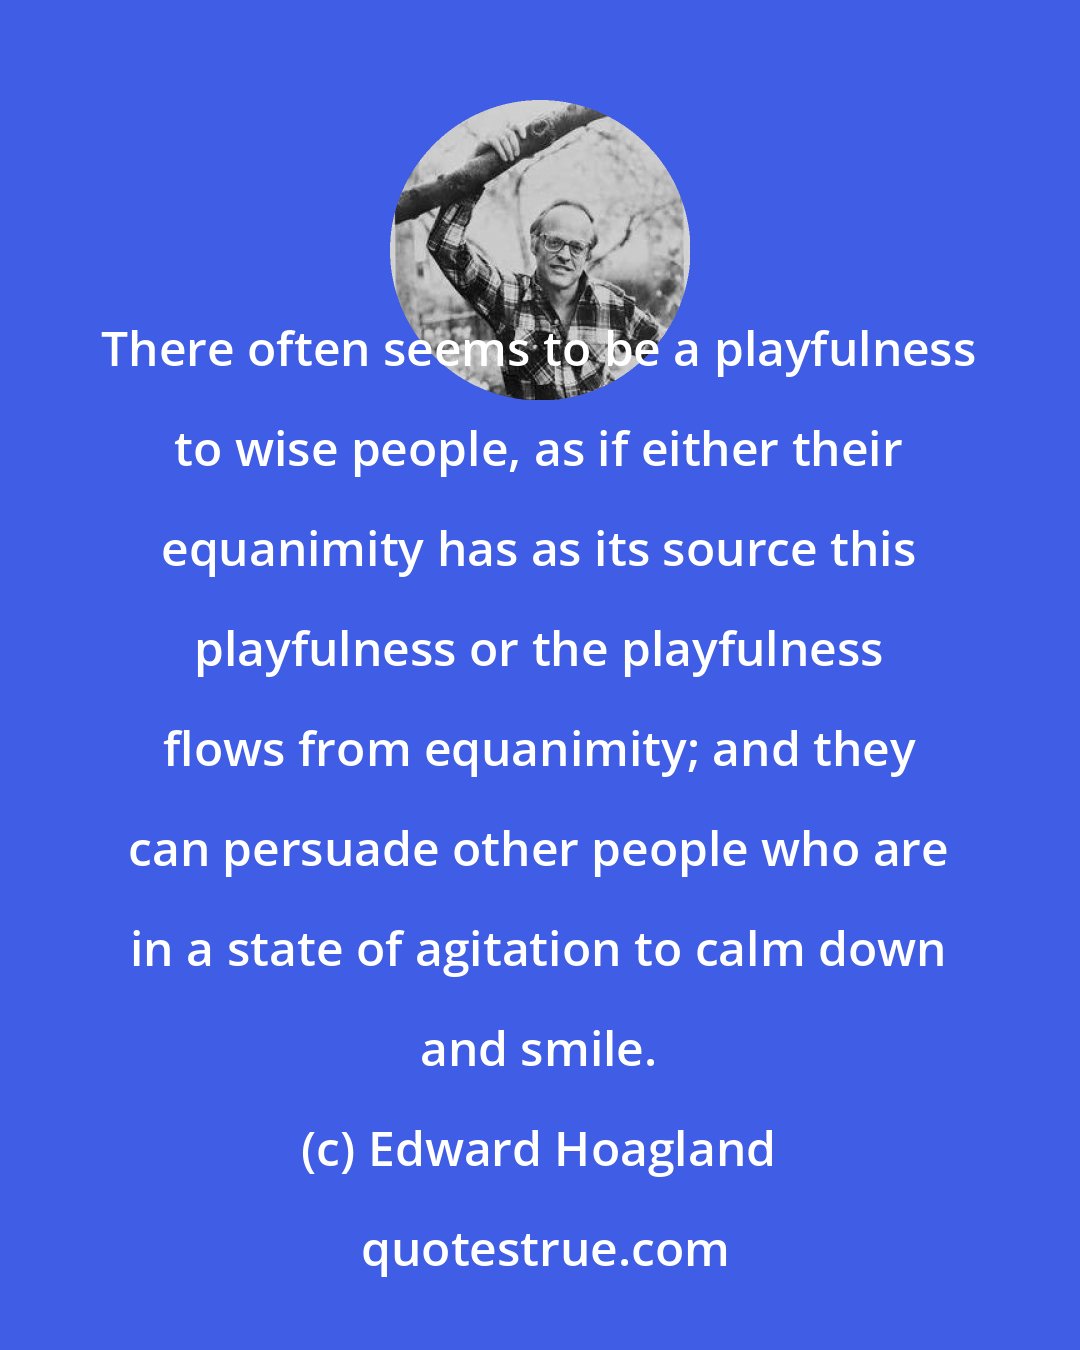 Edward Hoagland: There often seems to be a playfulness to wise people, as if either their equanimity has as its source this playfulness or the playfulness flows from equanimity; and they can persuade other people who are in a state of agitation to calm down and smile.